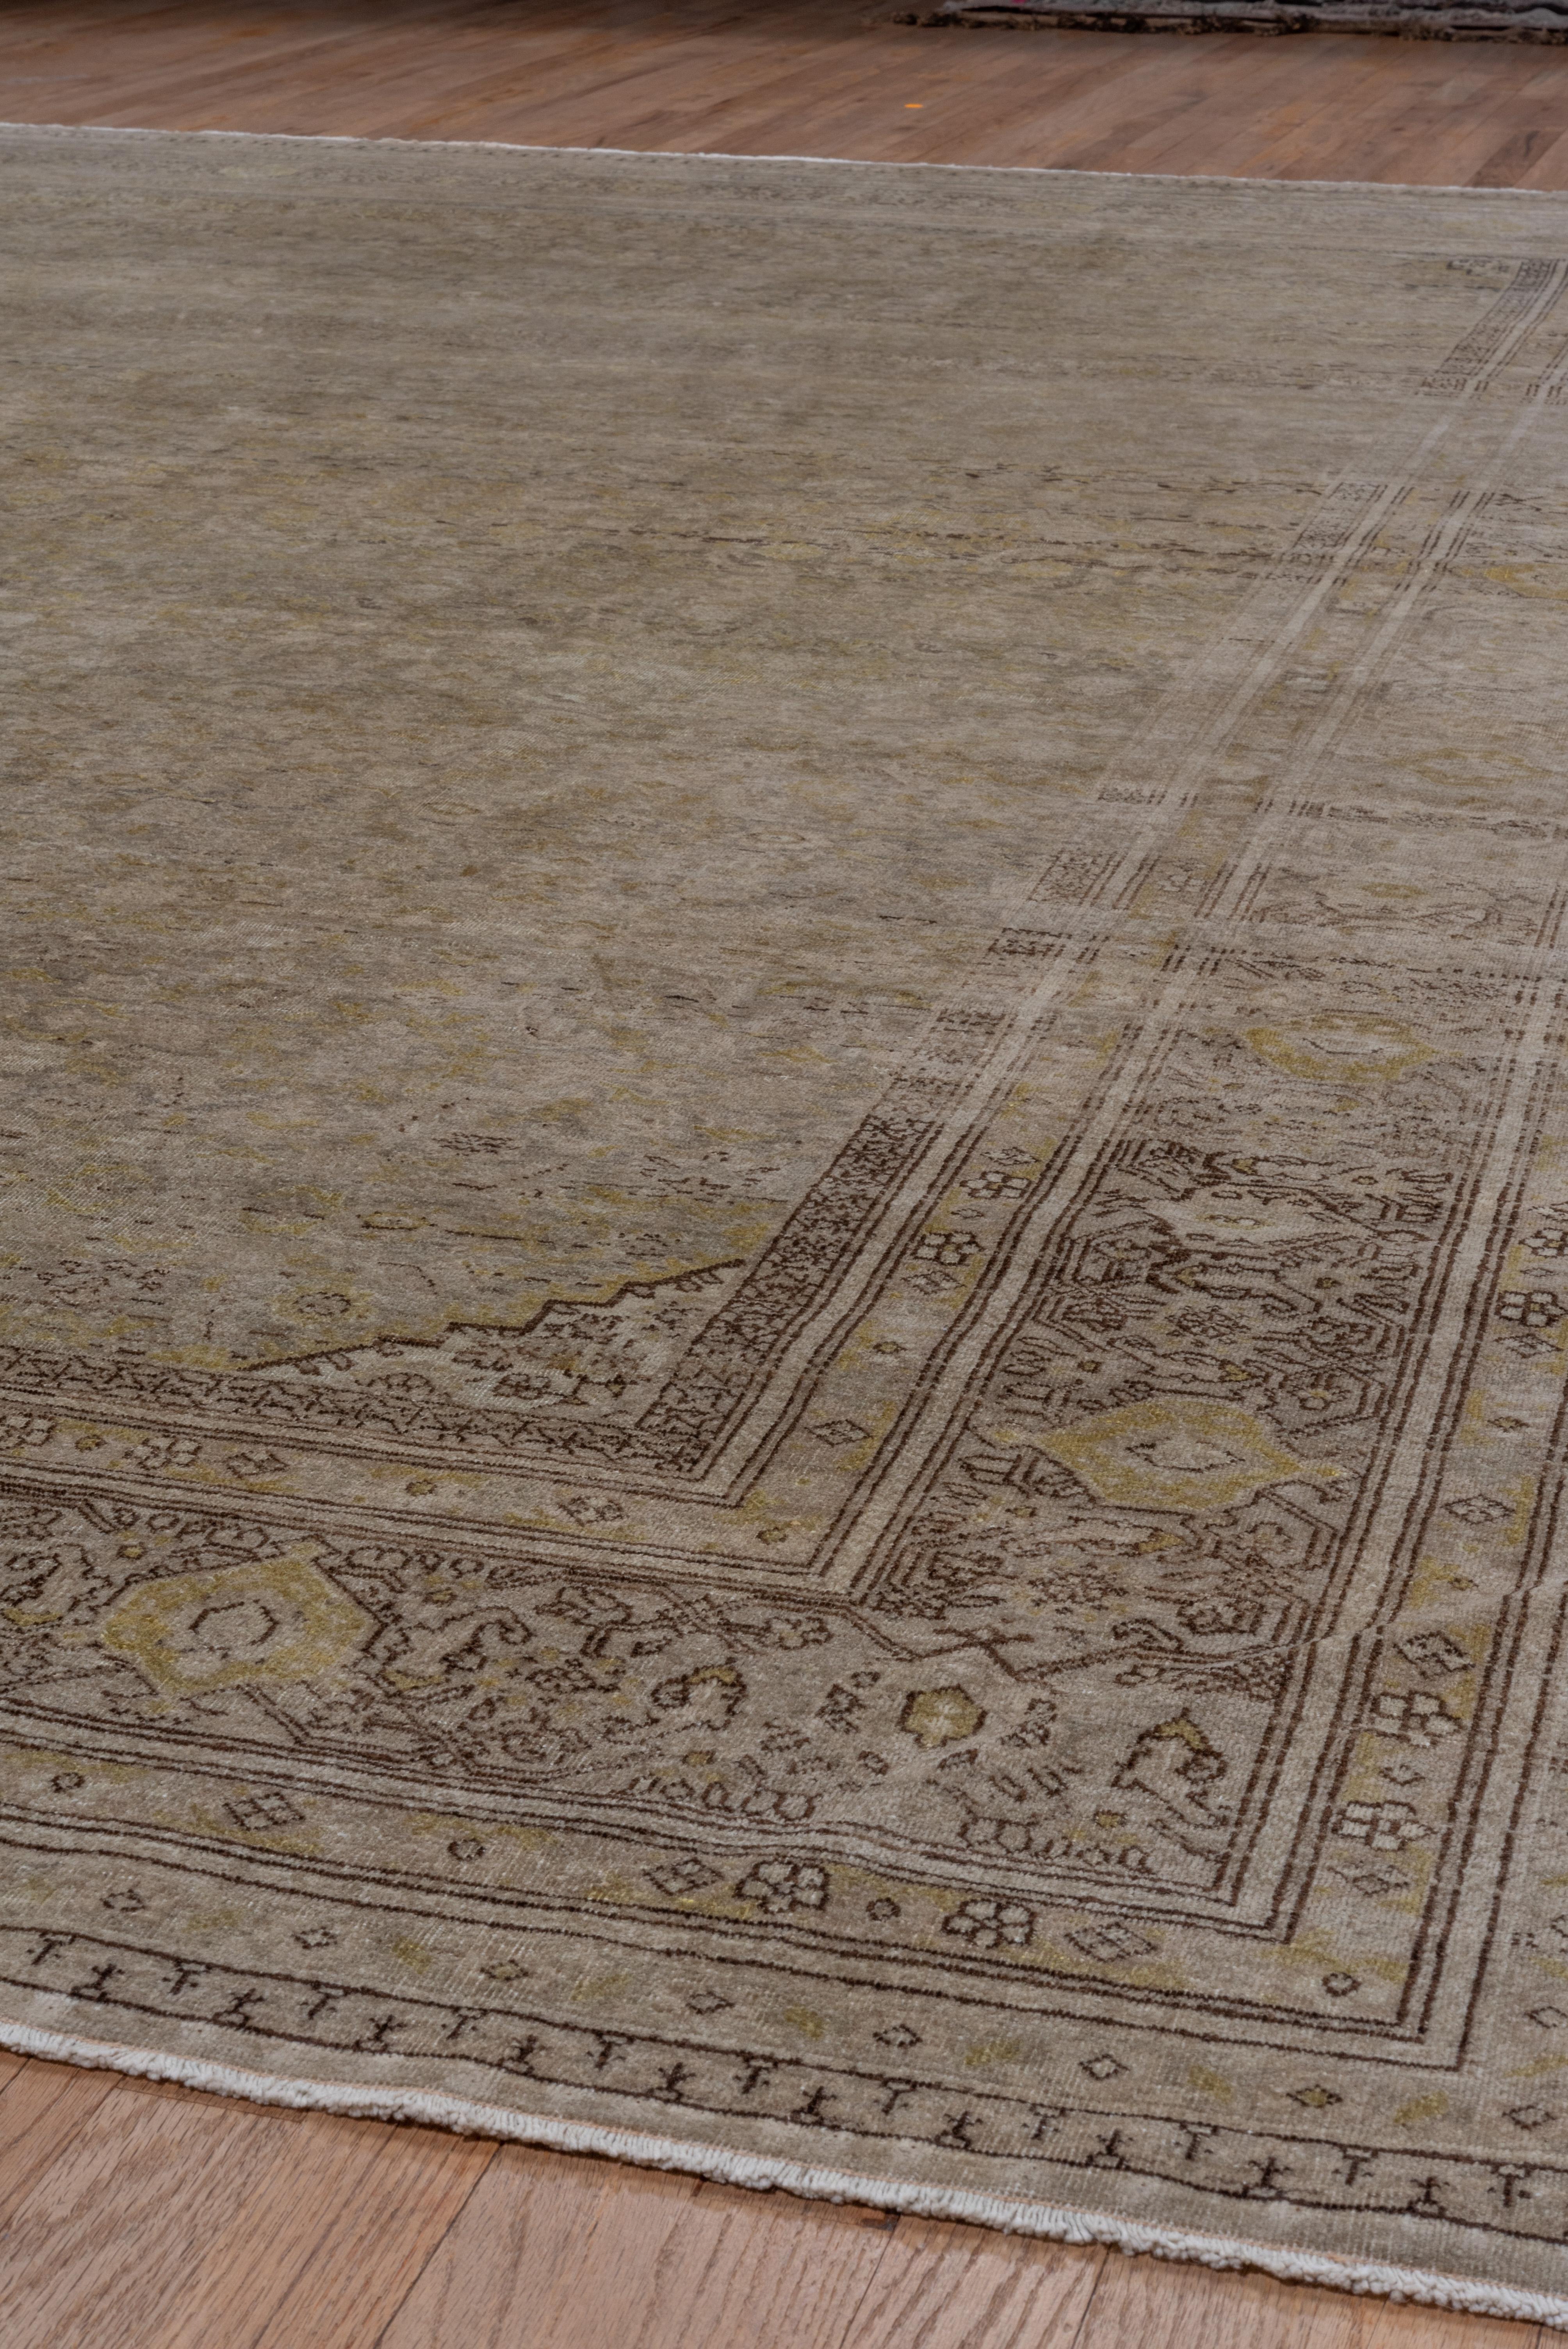 Hand-Knotted Antique Turkish Sivas Rug, Herati Design, Light Brown Field with Gold Tones